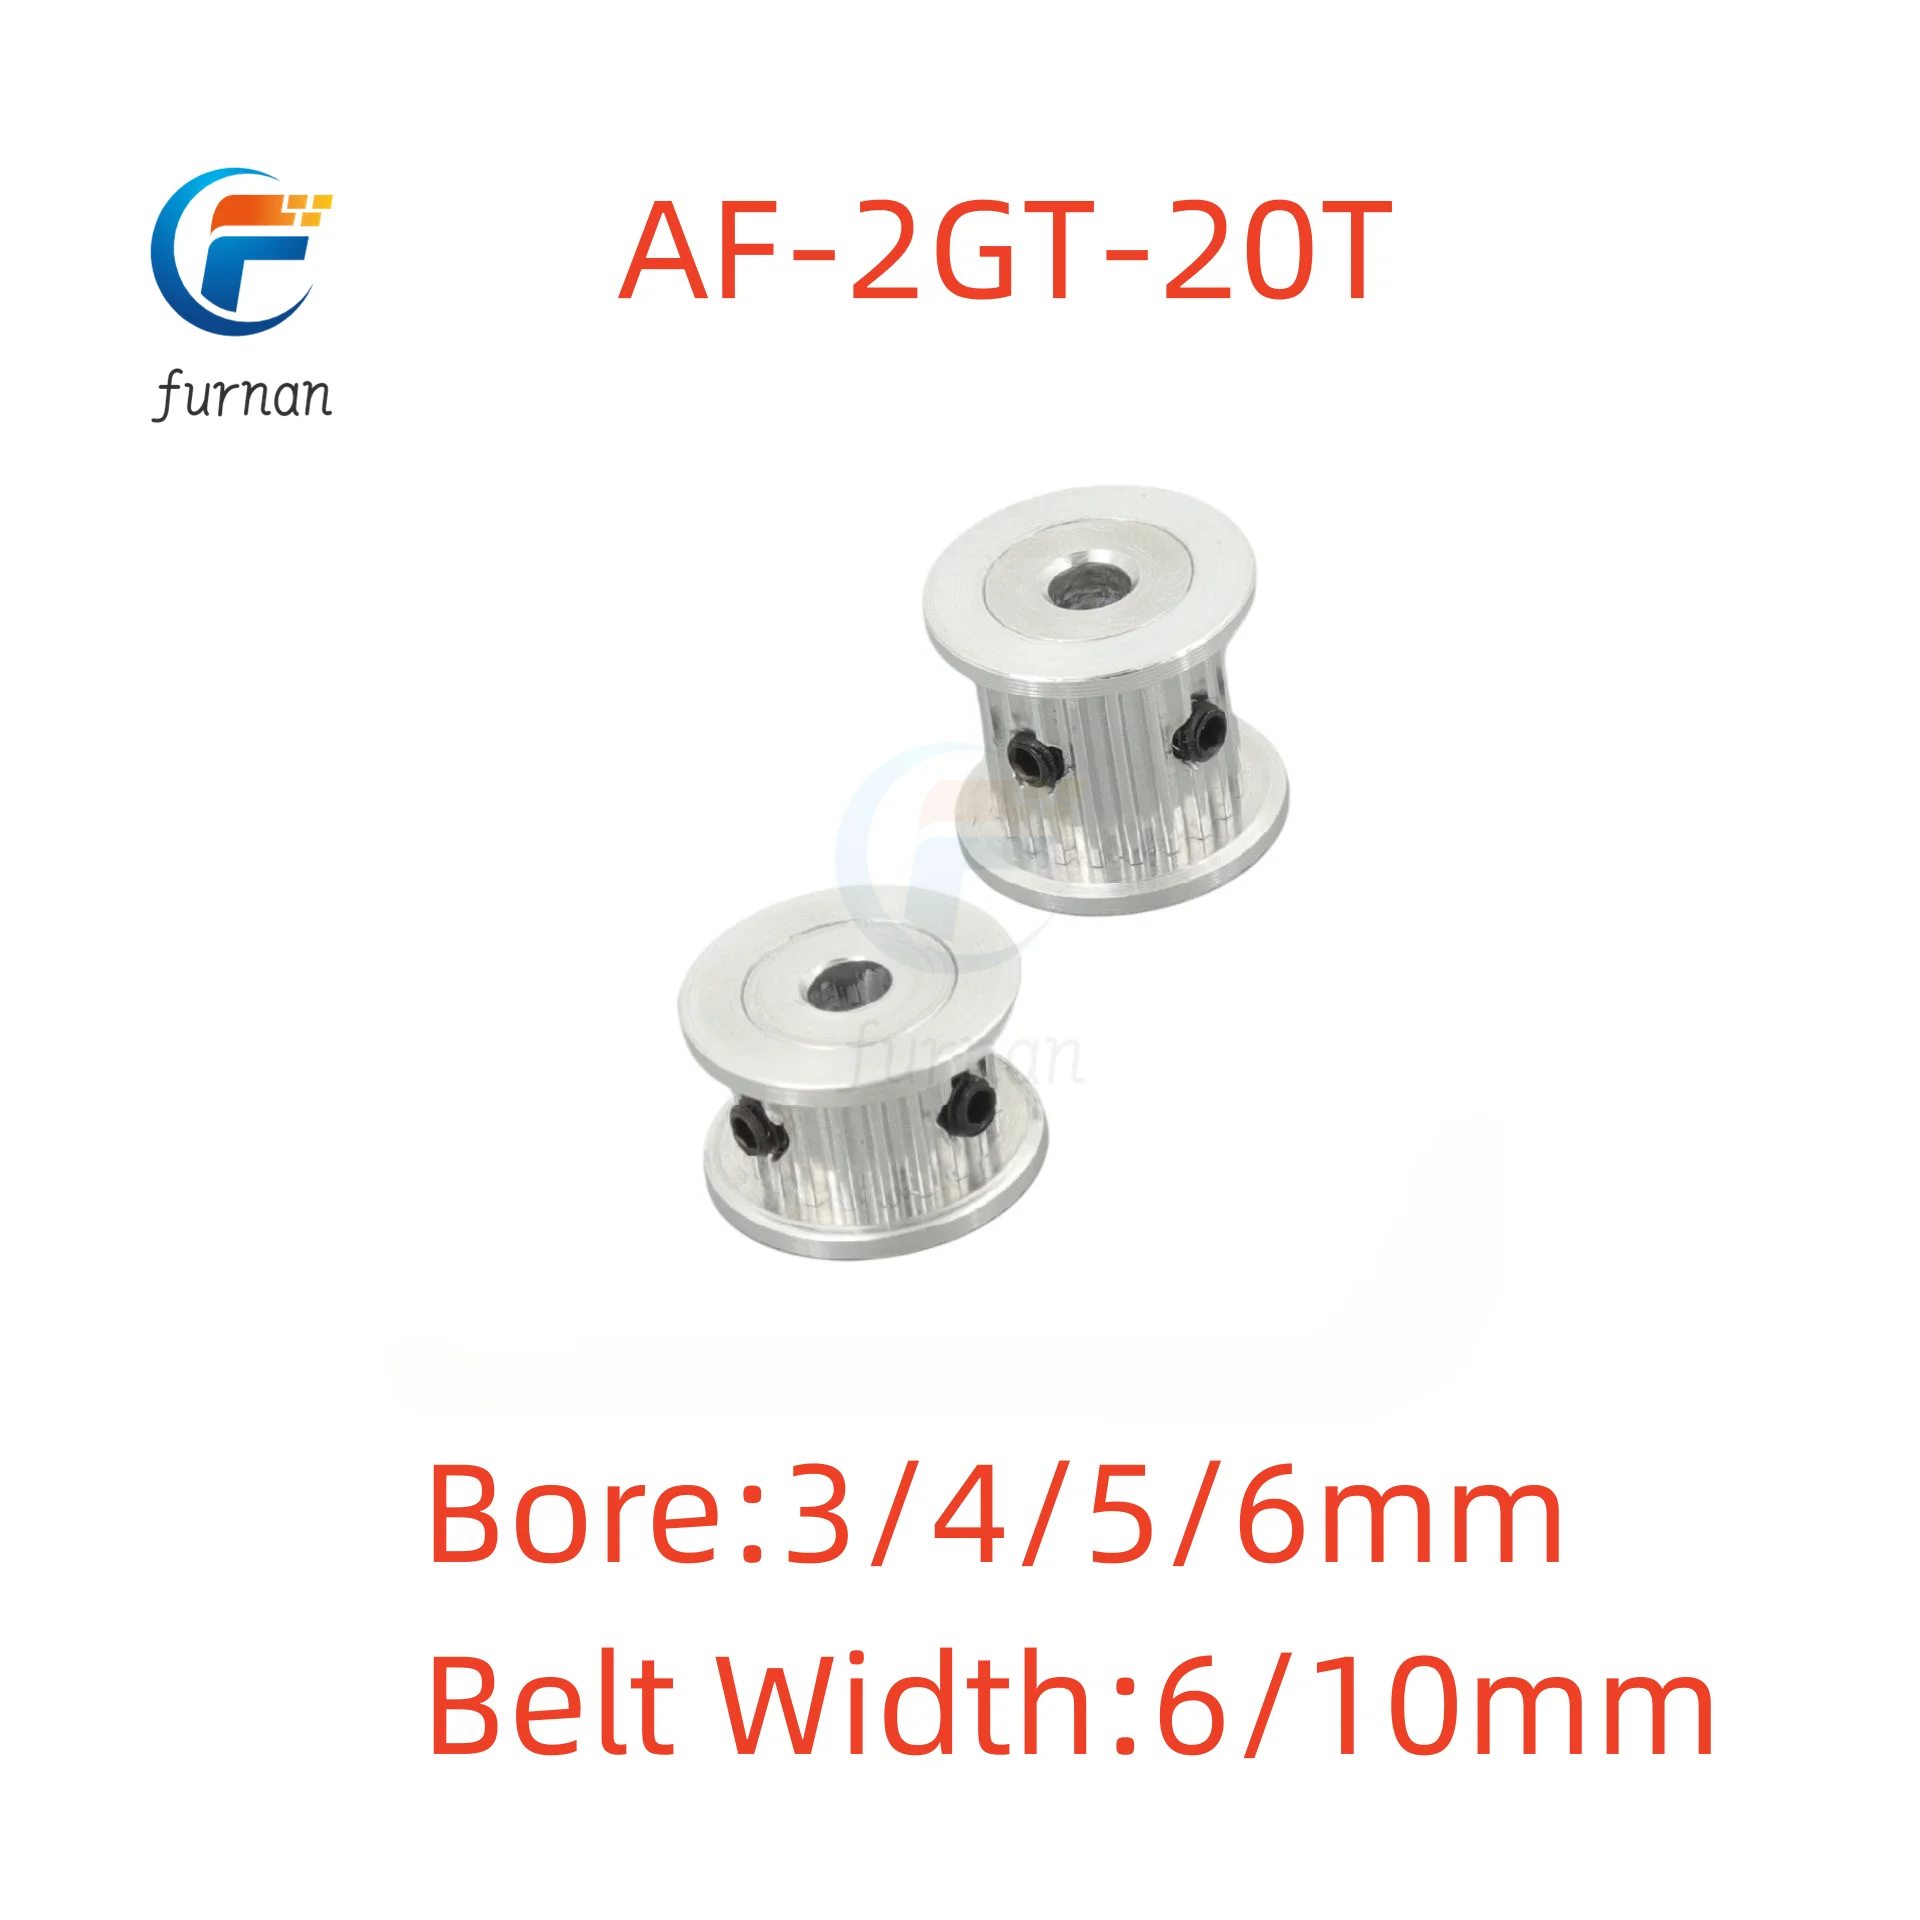 

20T 2GT Timing Pulley Bore 3/4/5/6mm for Width 6/10mm GT2 Synchronous Belt 3D Printer CNC Parts AF Type Pitch 2mm